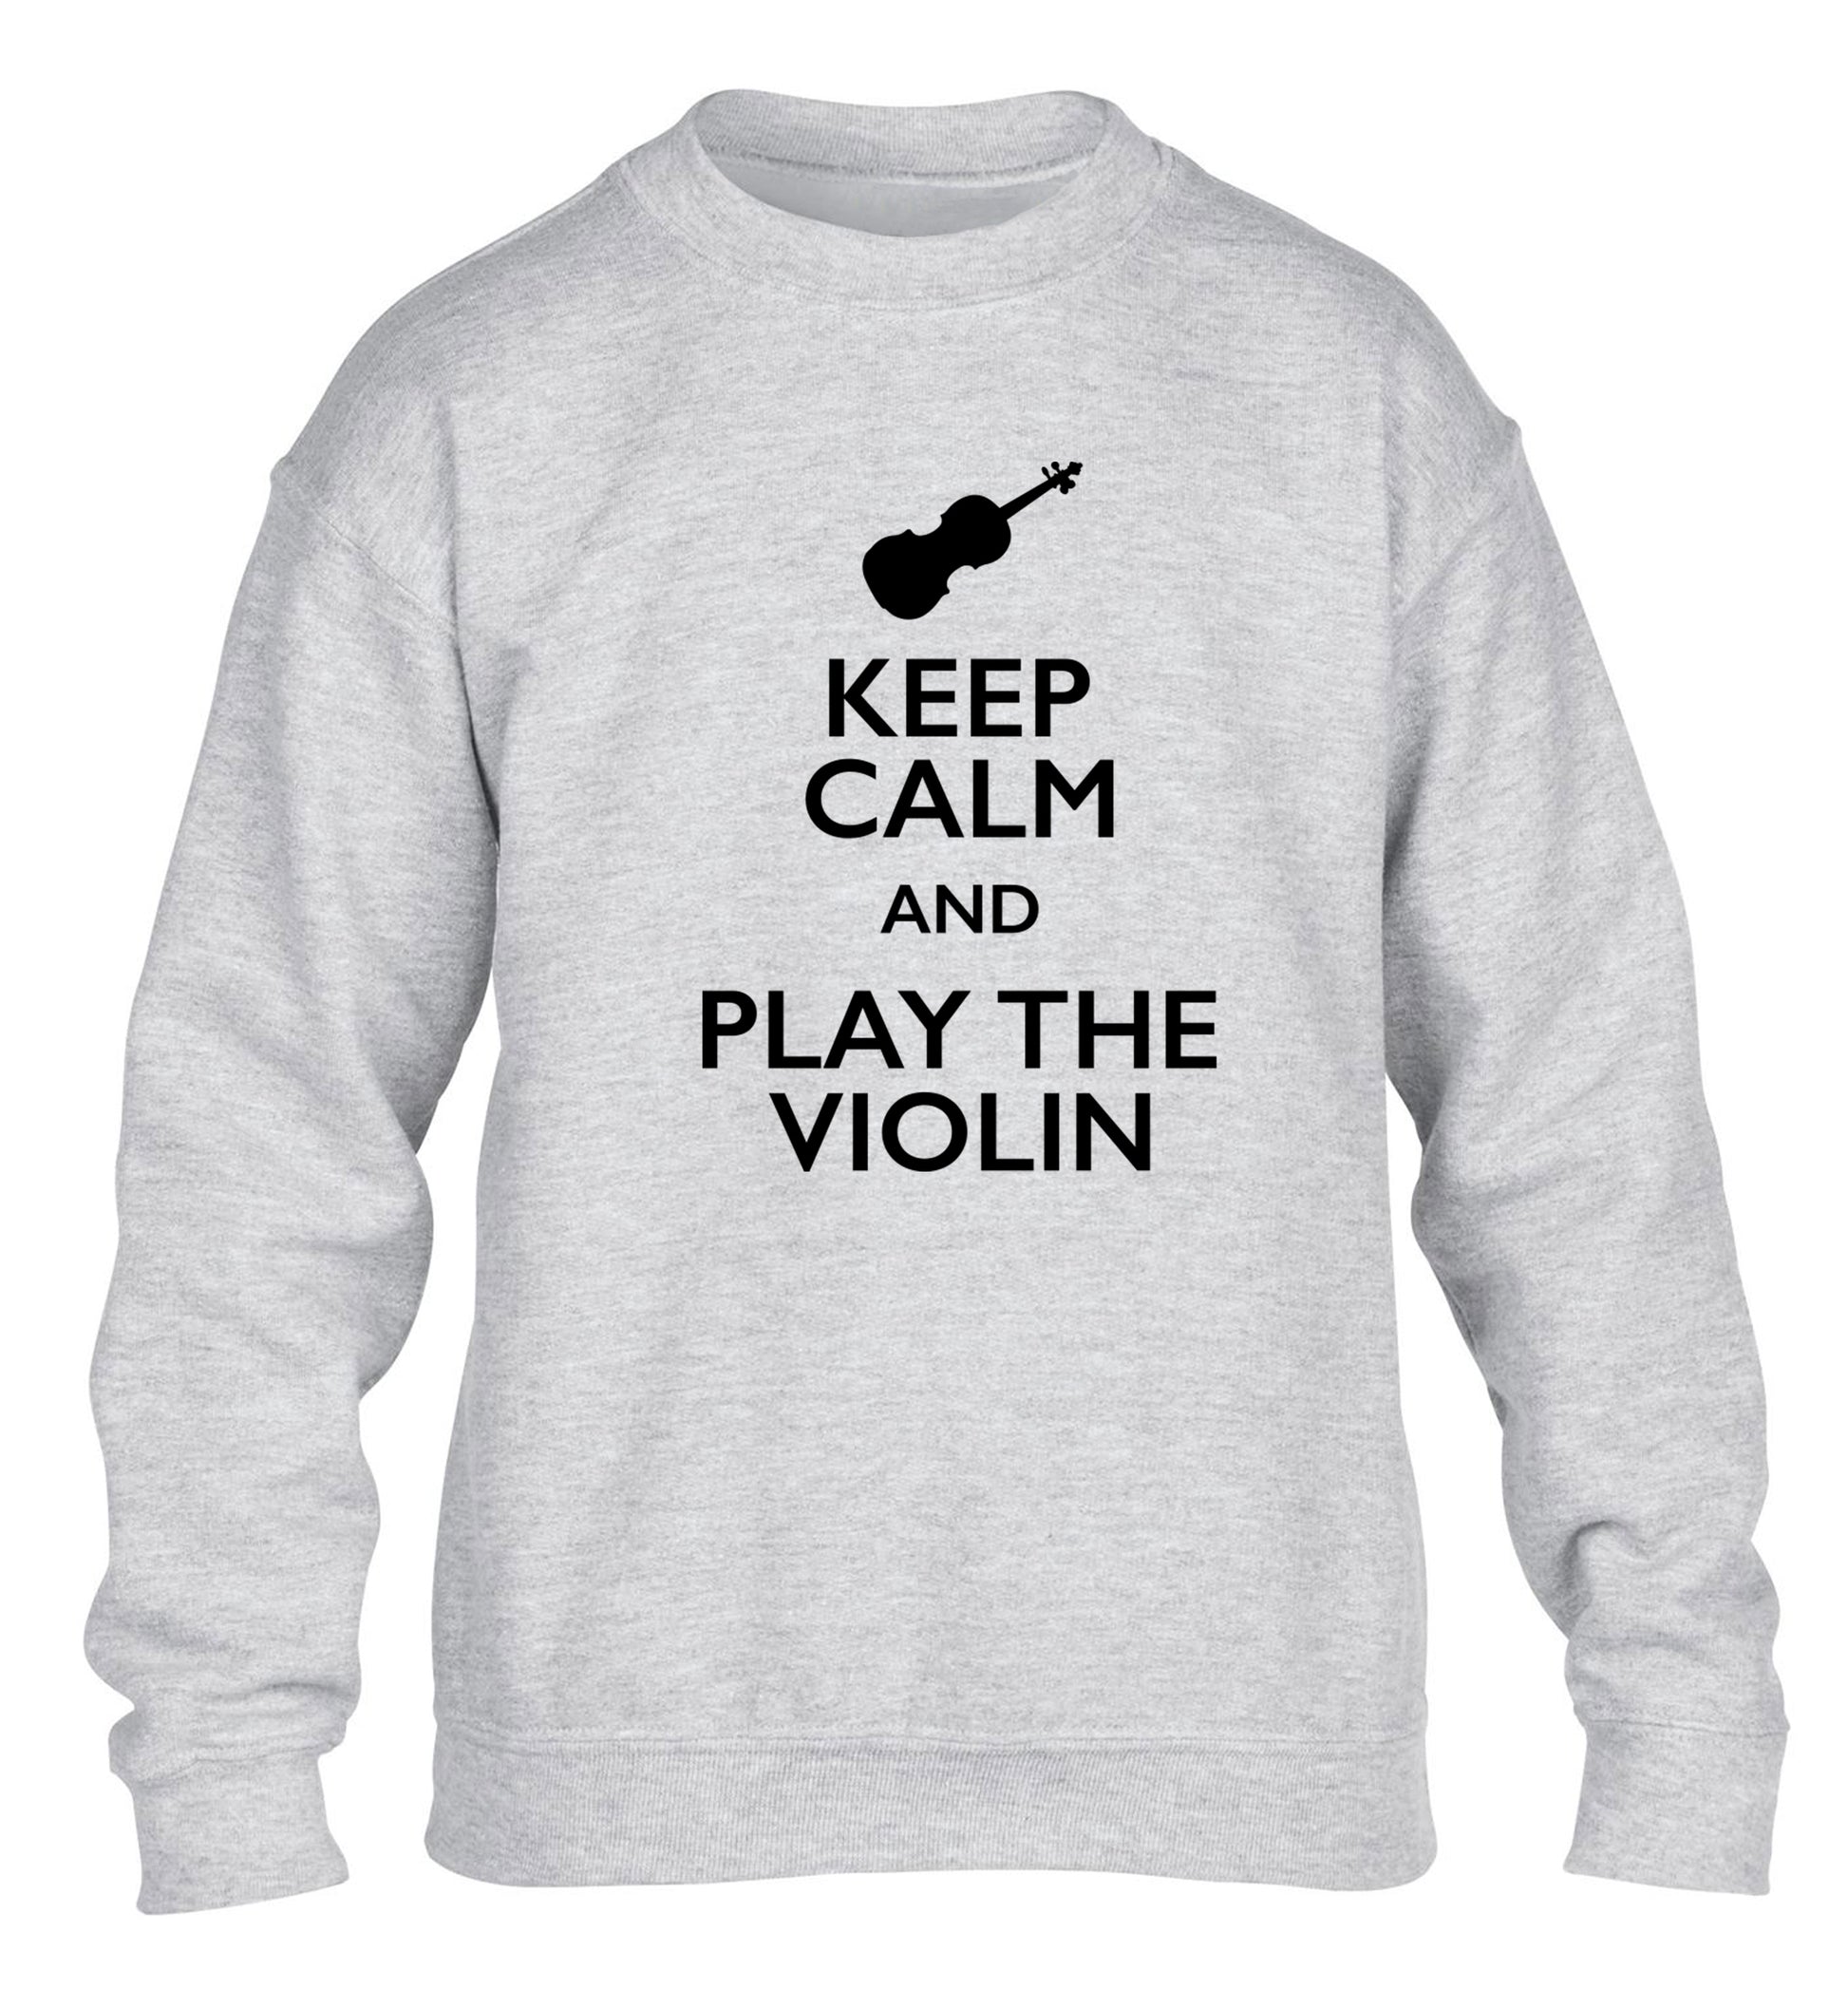 Keep calm and play the violin children's grey sweater 12-13 Years